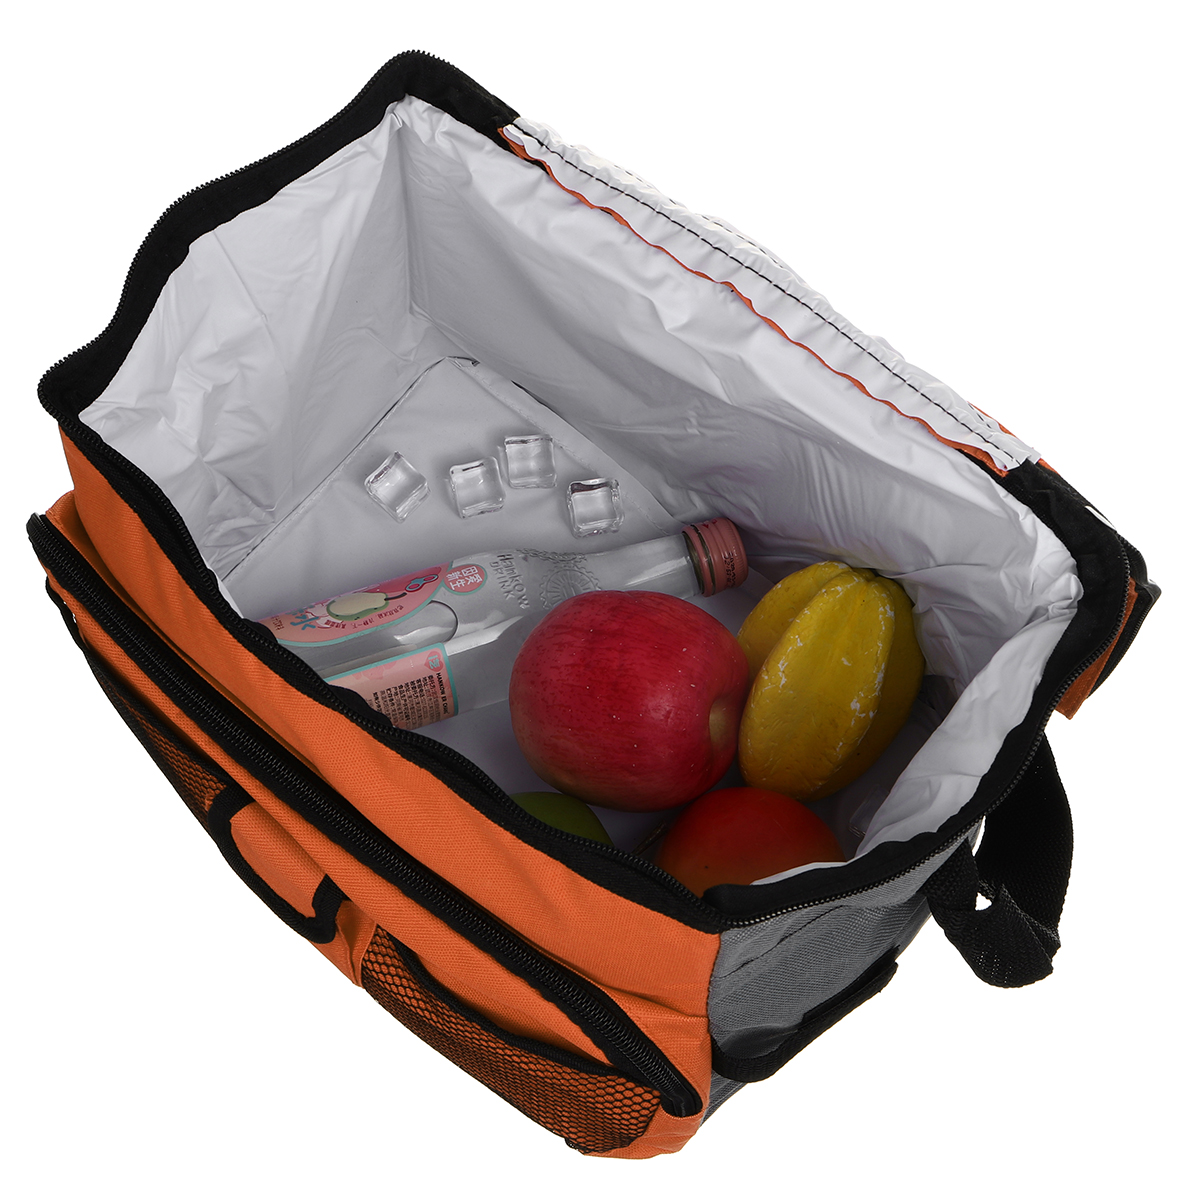 3L-Insulated-Lunch-Bag-Food-Container-Box-Bag-Food-Delivery-Bag-Waterproof-Lightweight-Grocery-Stora-1731824-8